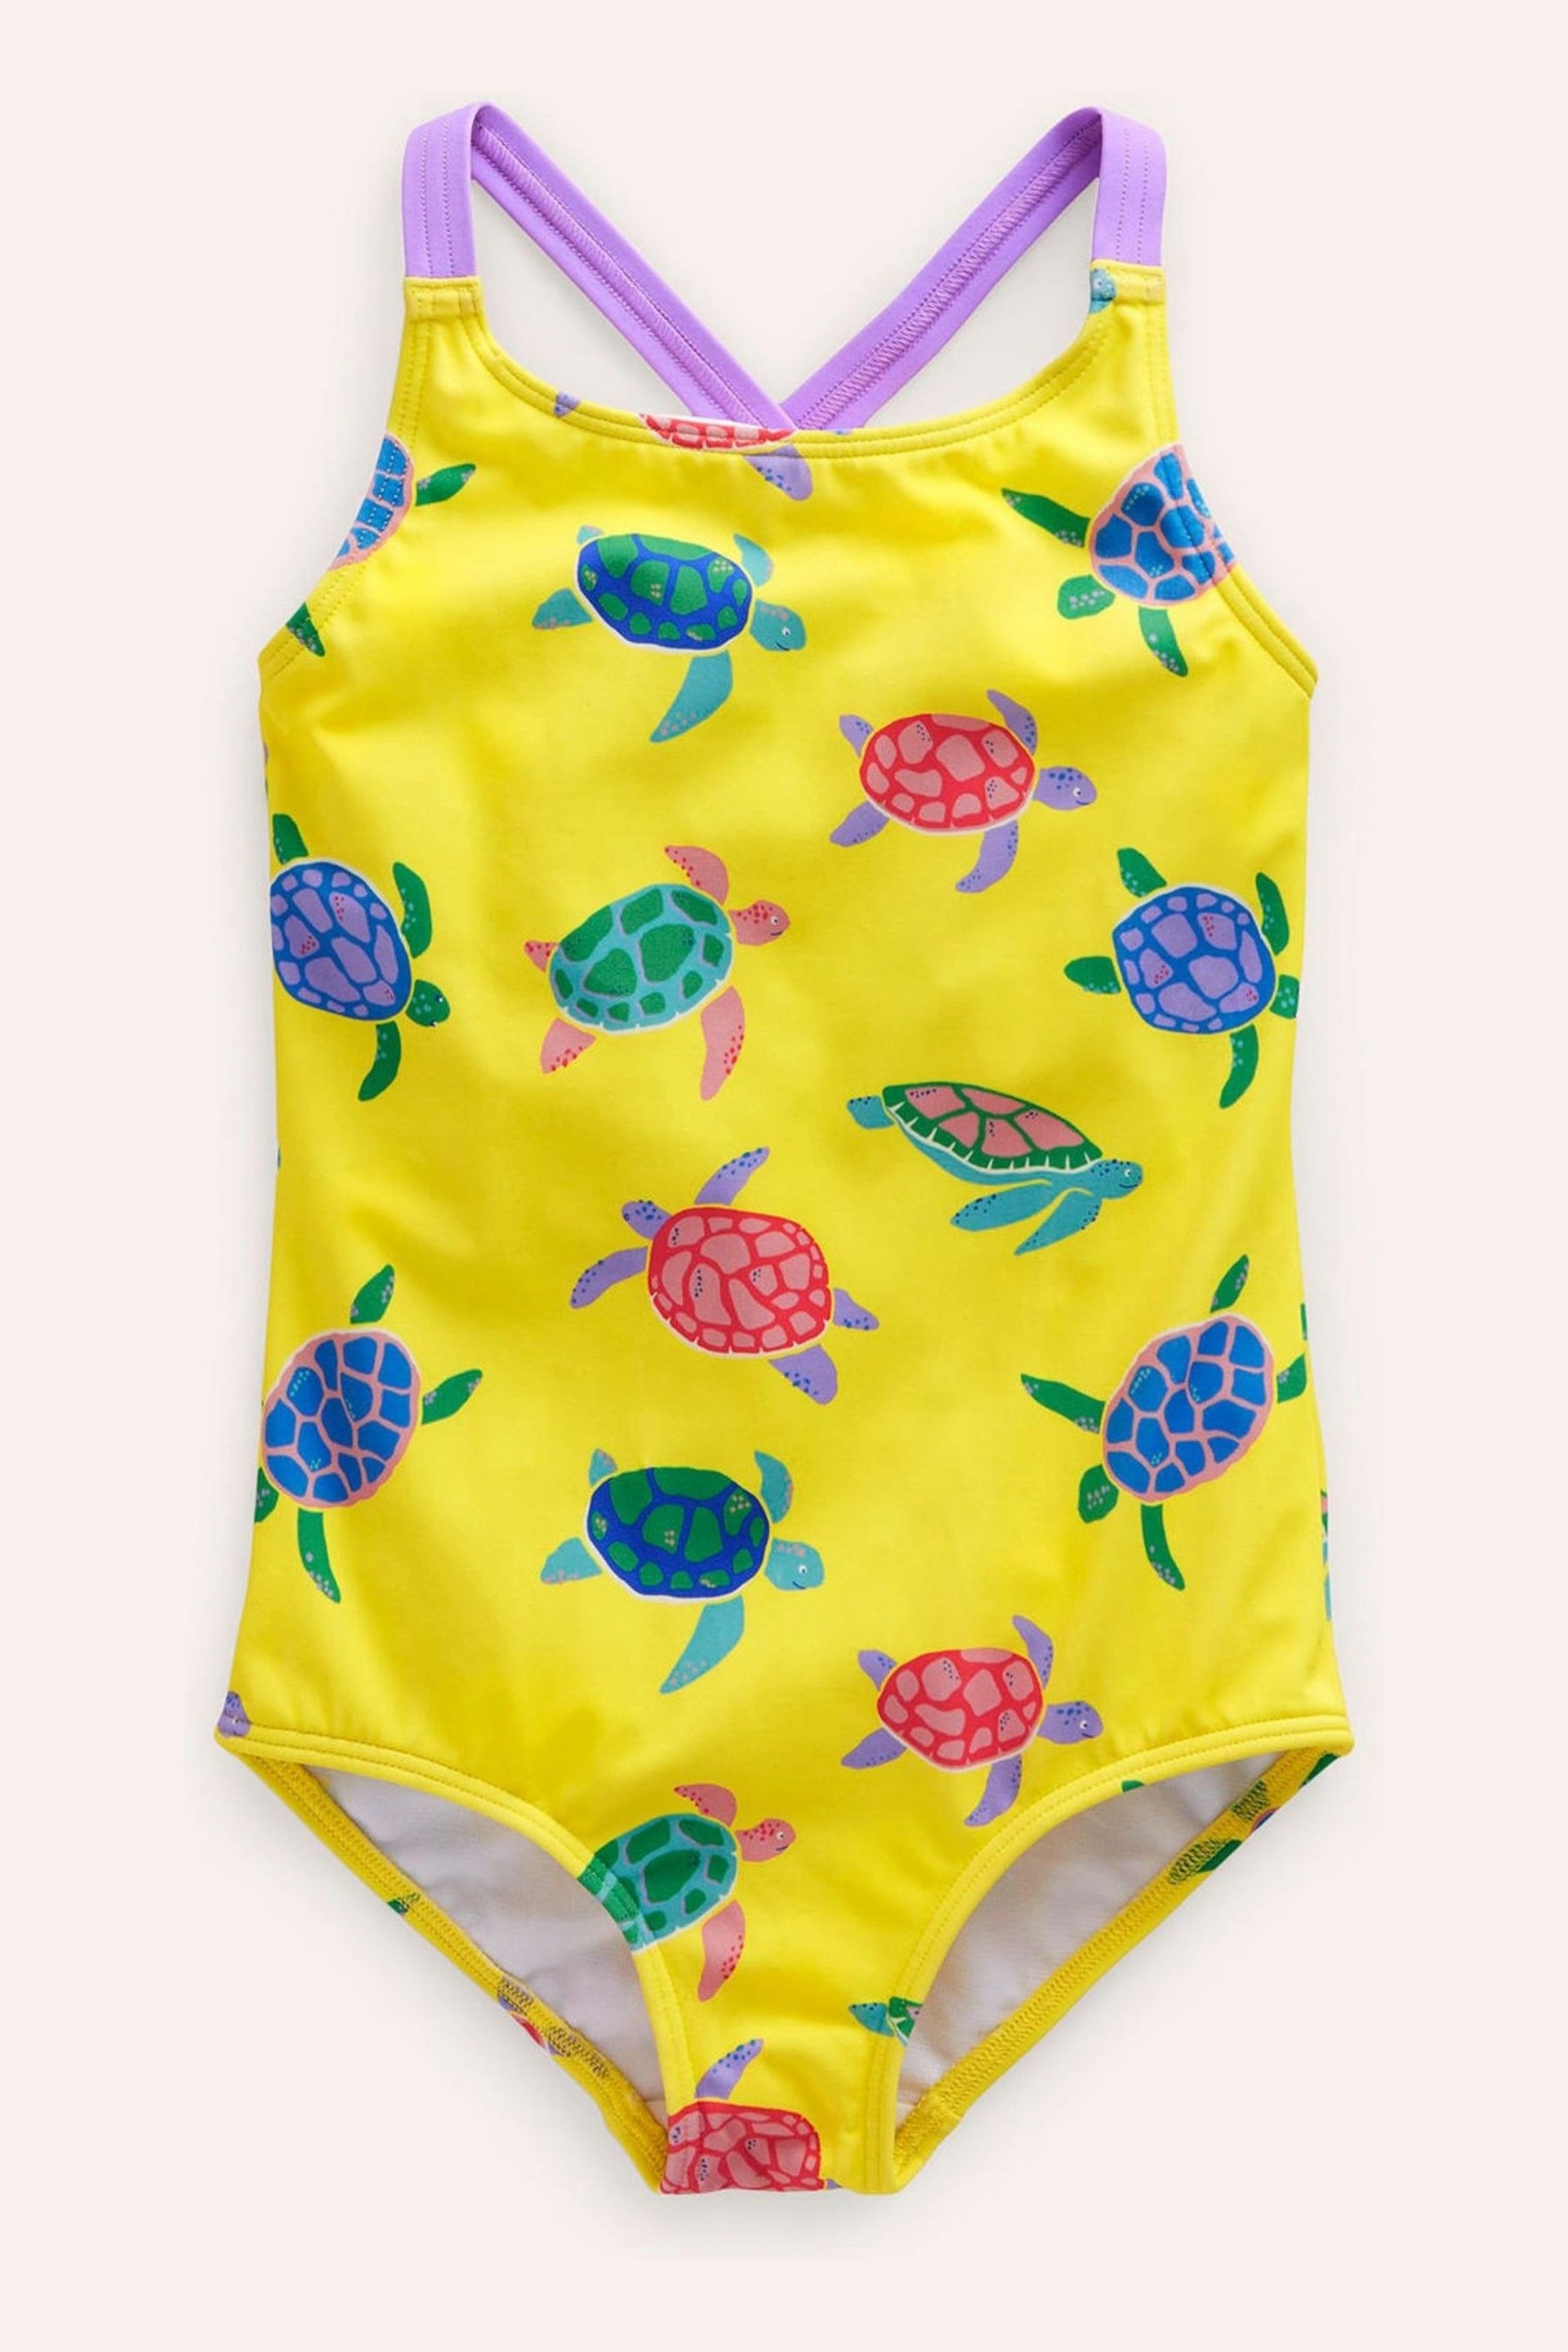 Boden Yellow Cross-Back Printed Swimsuit - Image 1 of 3